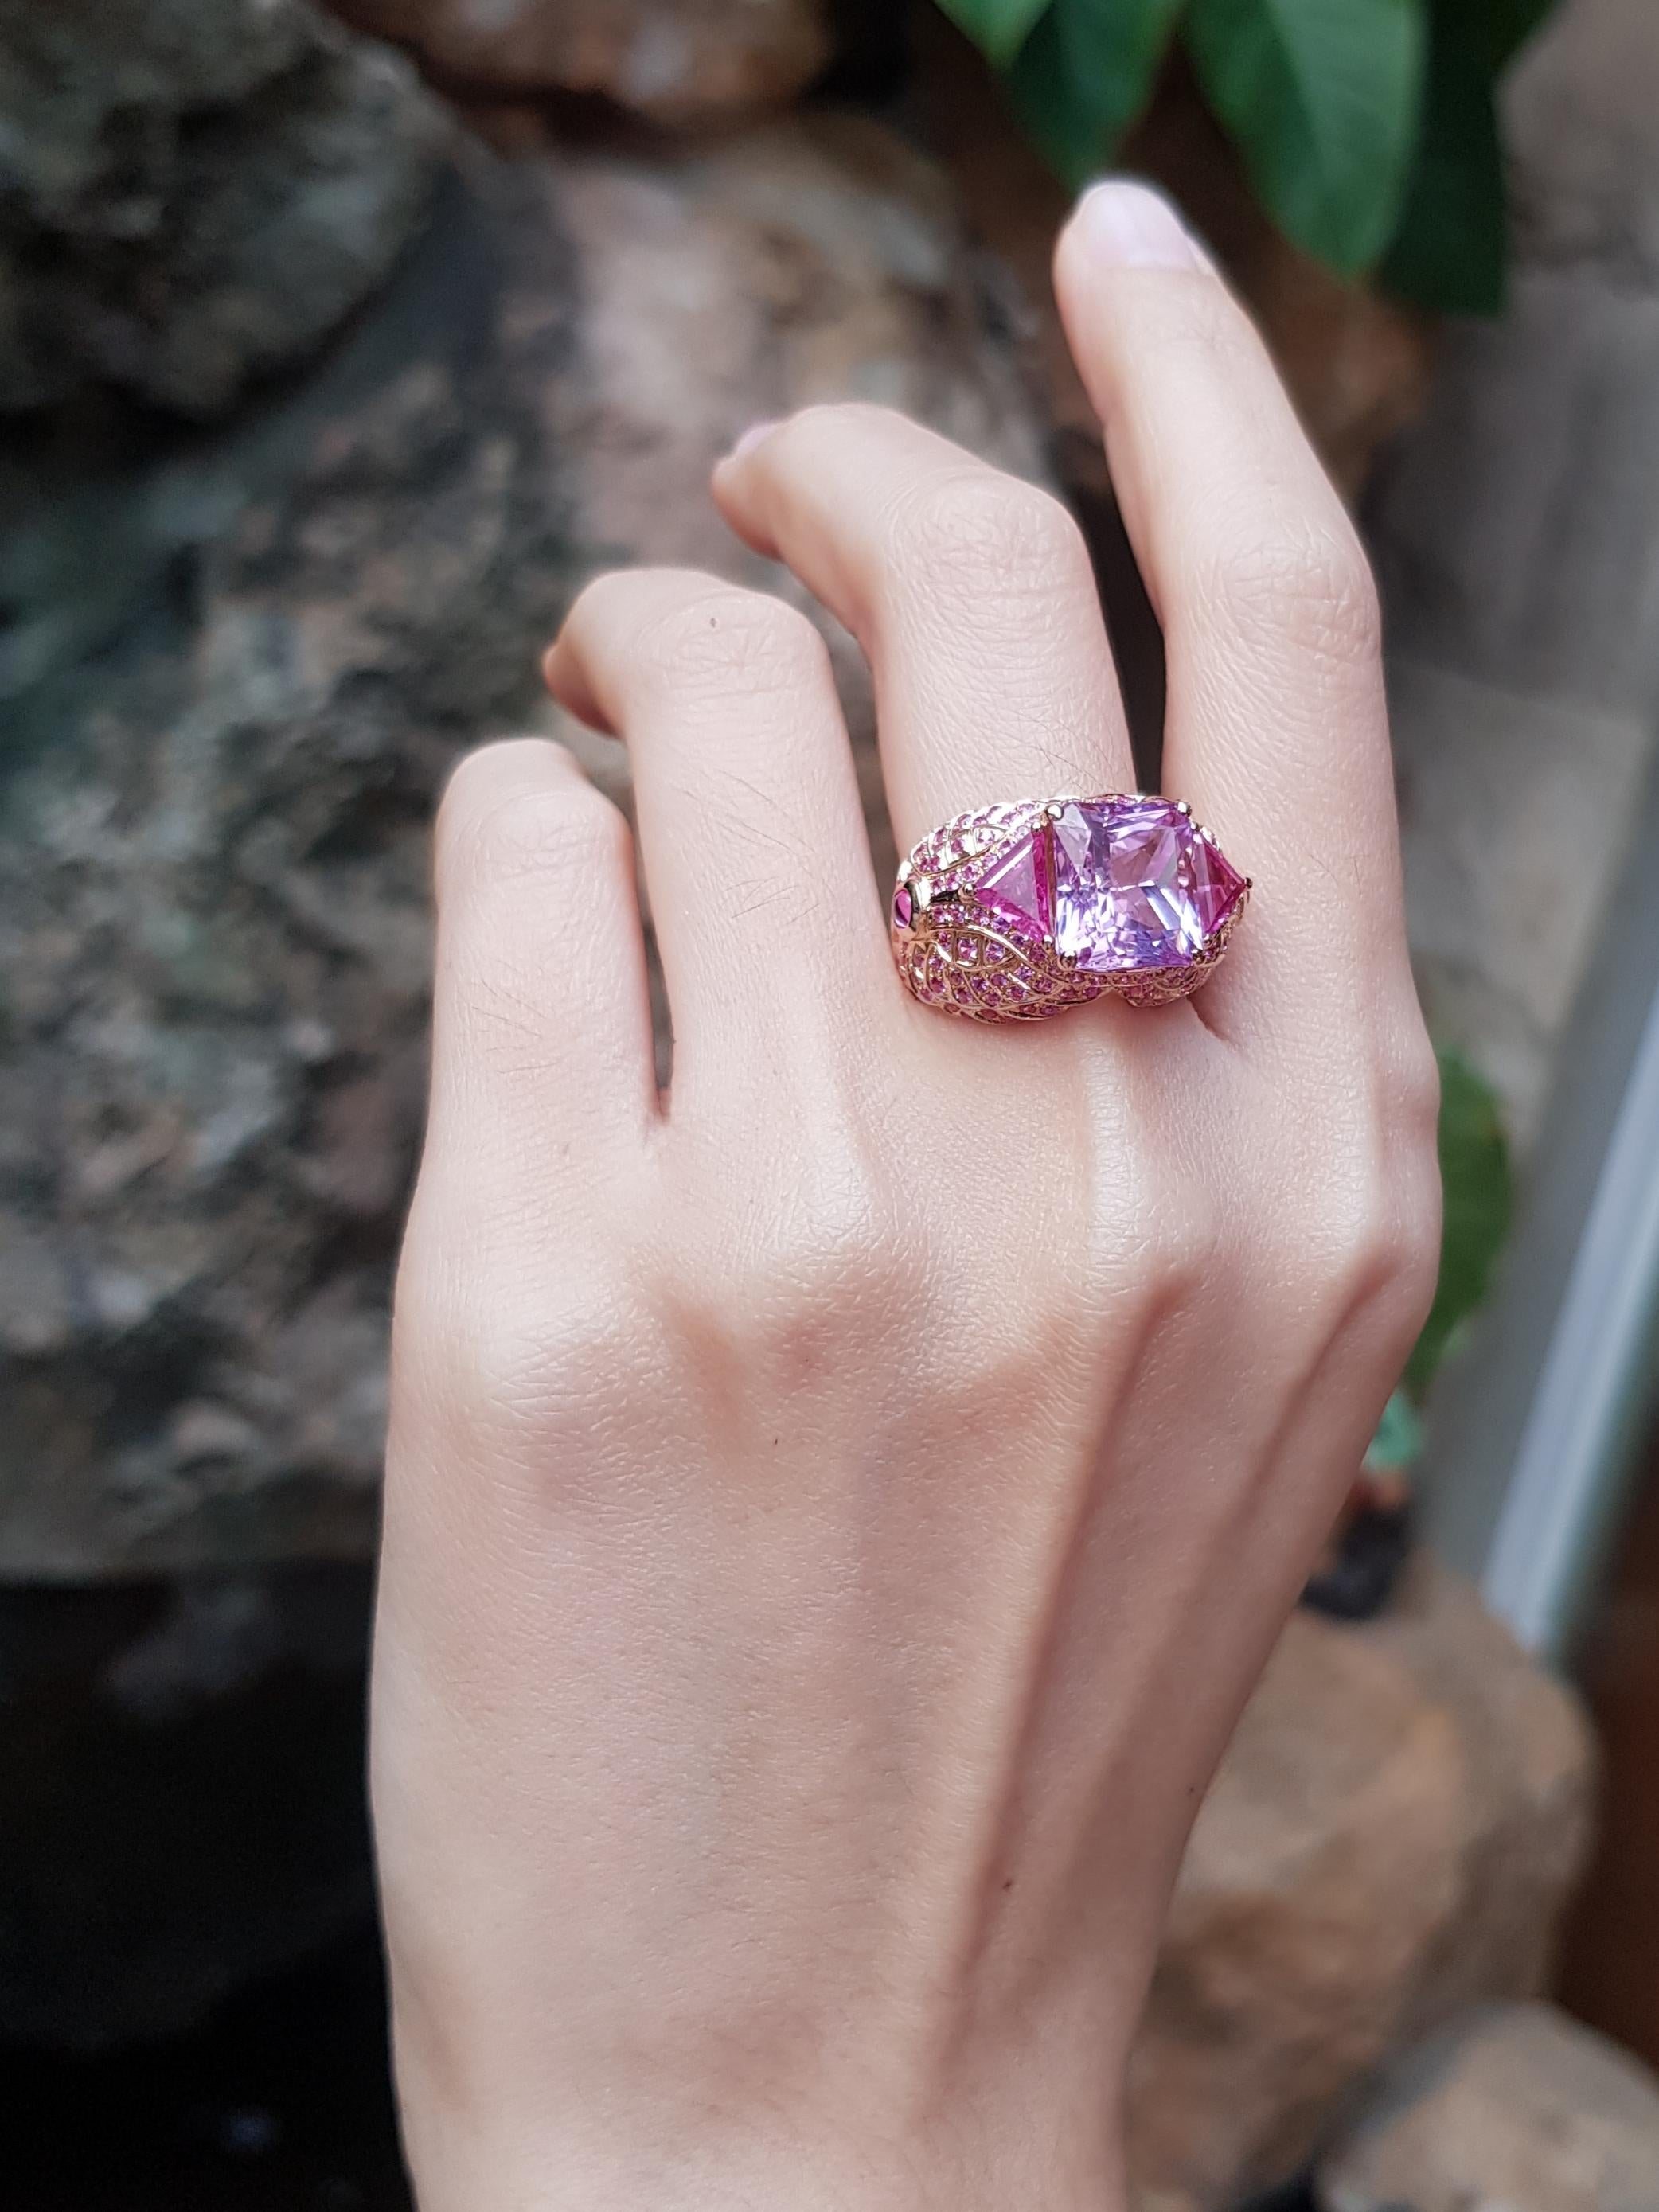 Kunzite 11.77 carats with Pink Sapphire 2.90 carats Ring set 18 Karat Rose Gold Settings

Width:  2.4 cm 
Length: 1.4 cm
Ring Size: 53
Total Weight: 10.04 grams

